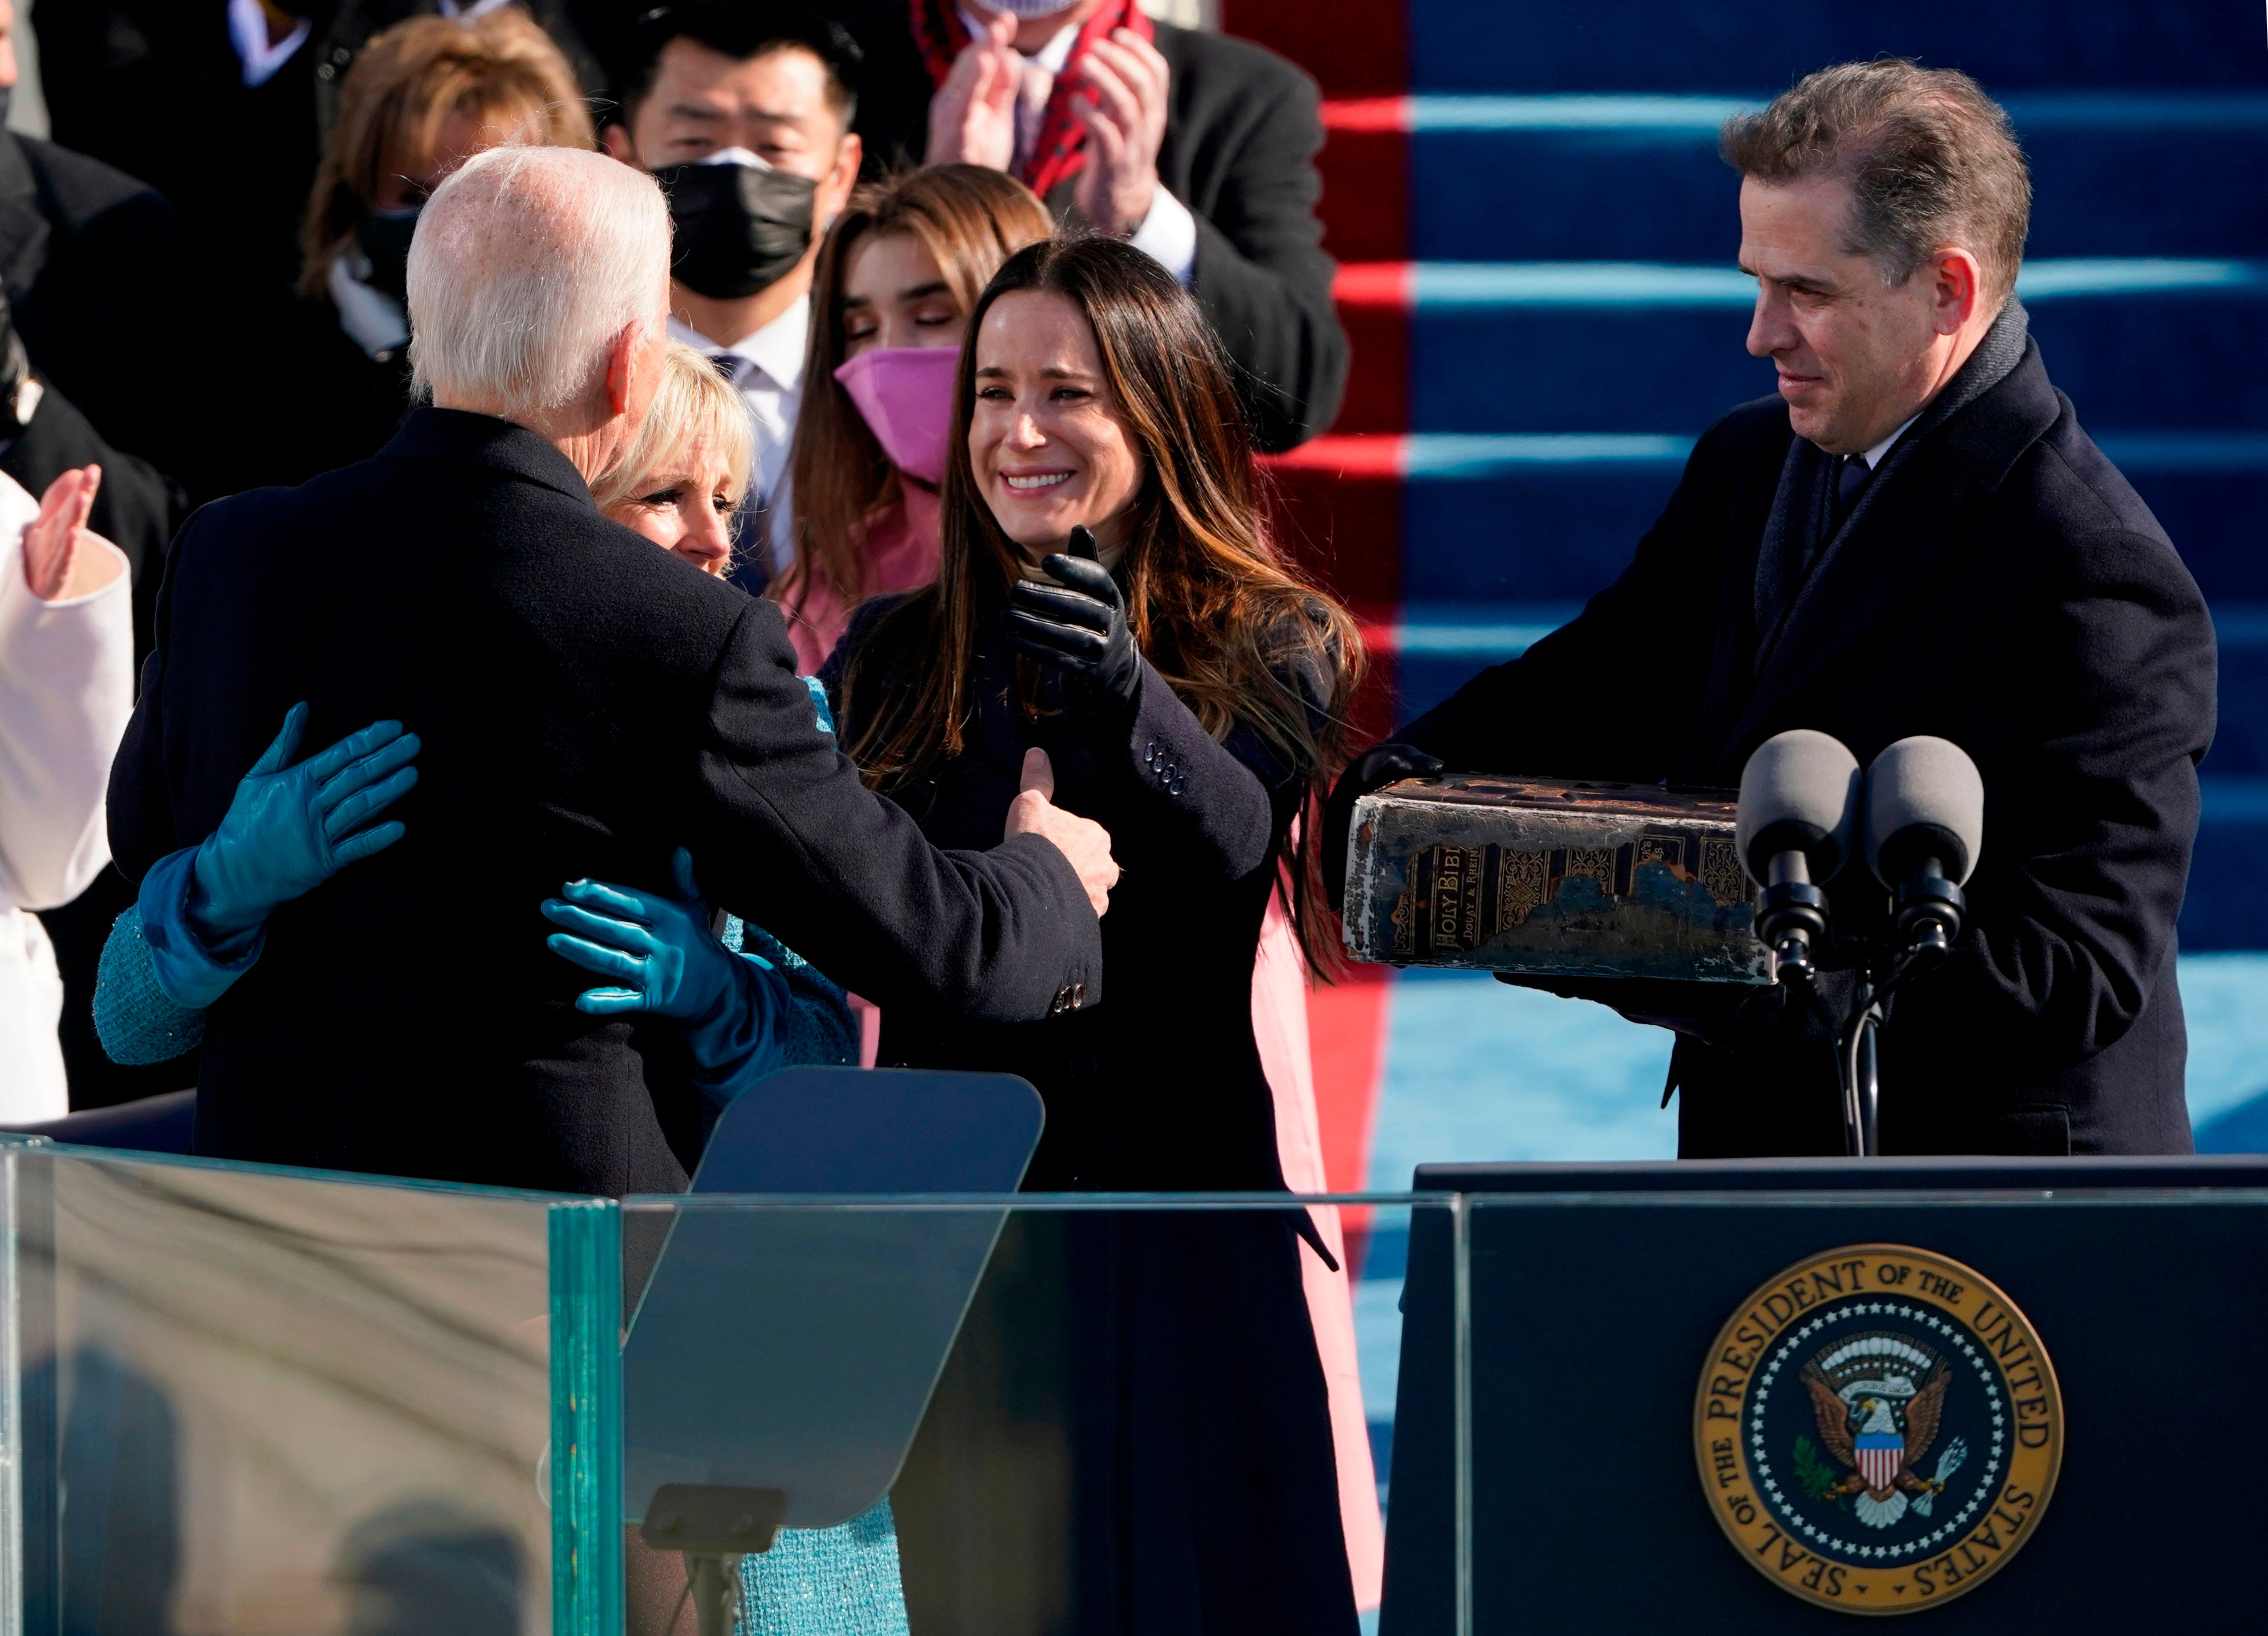 President Joe Biden is congratulated by First lady Jill Biden and children Ashley (second from right) and Hunter (right) after being sworn-in during the 59th Presidential Inauguration on January 20, 2021, at the US Capitol in Washington, DC.